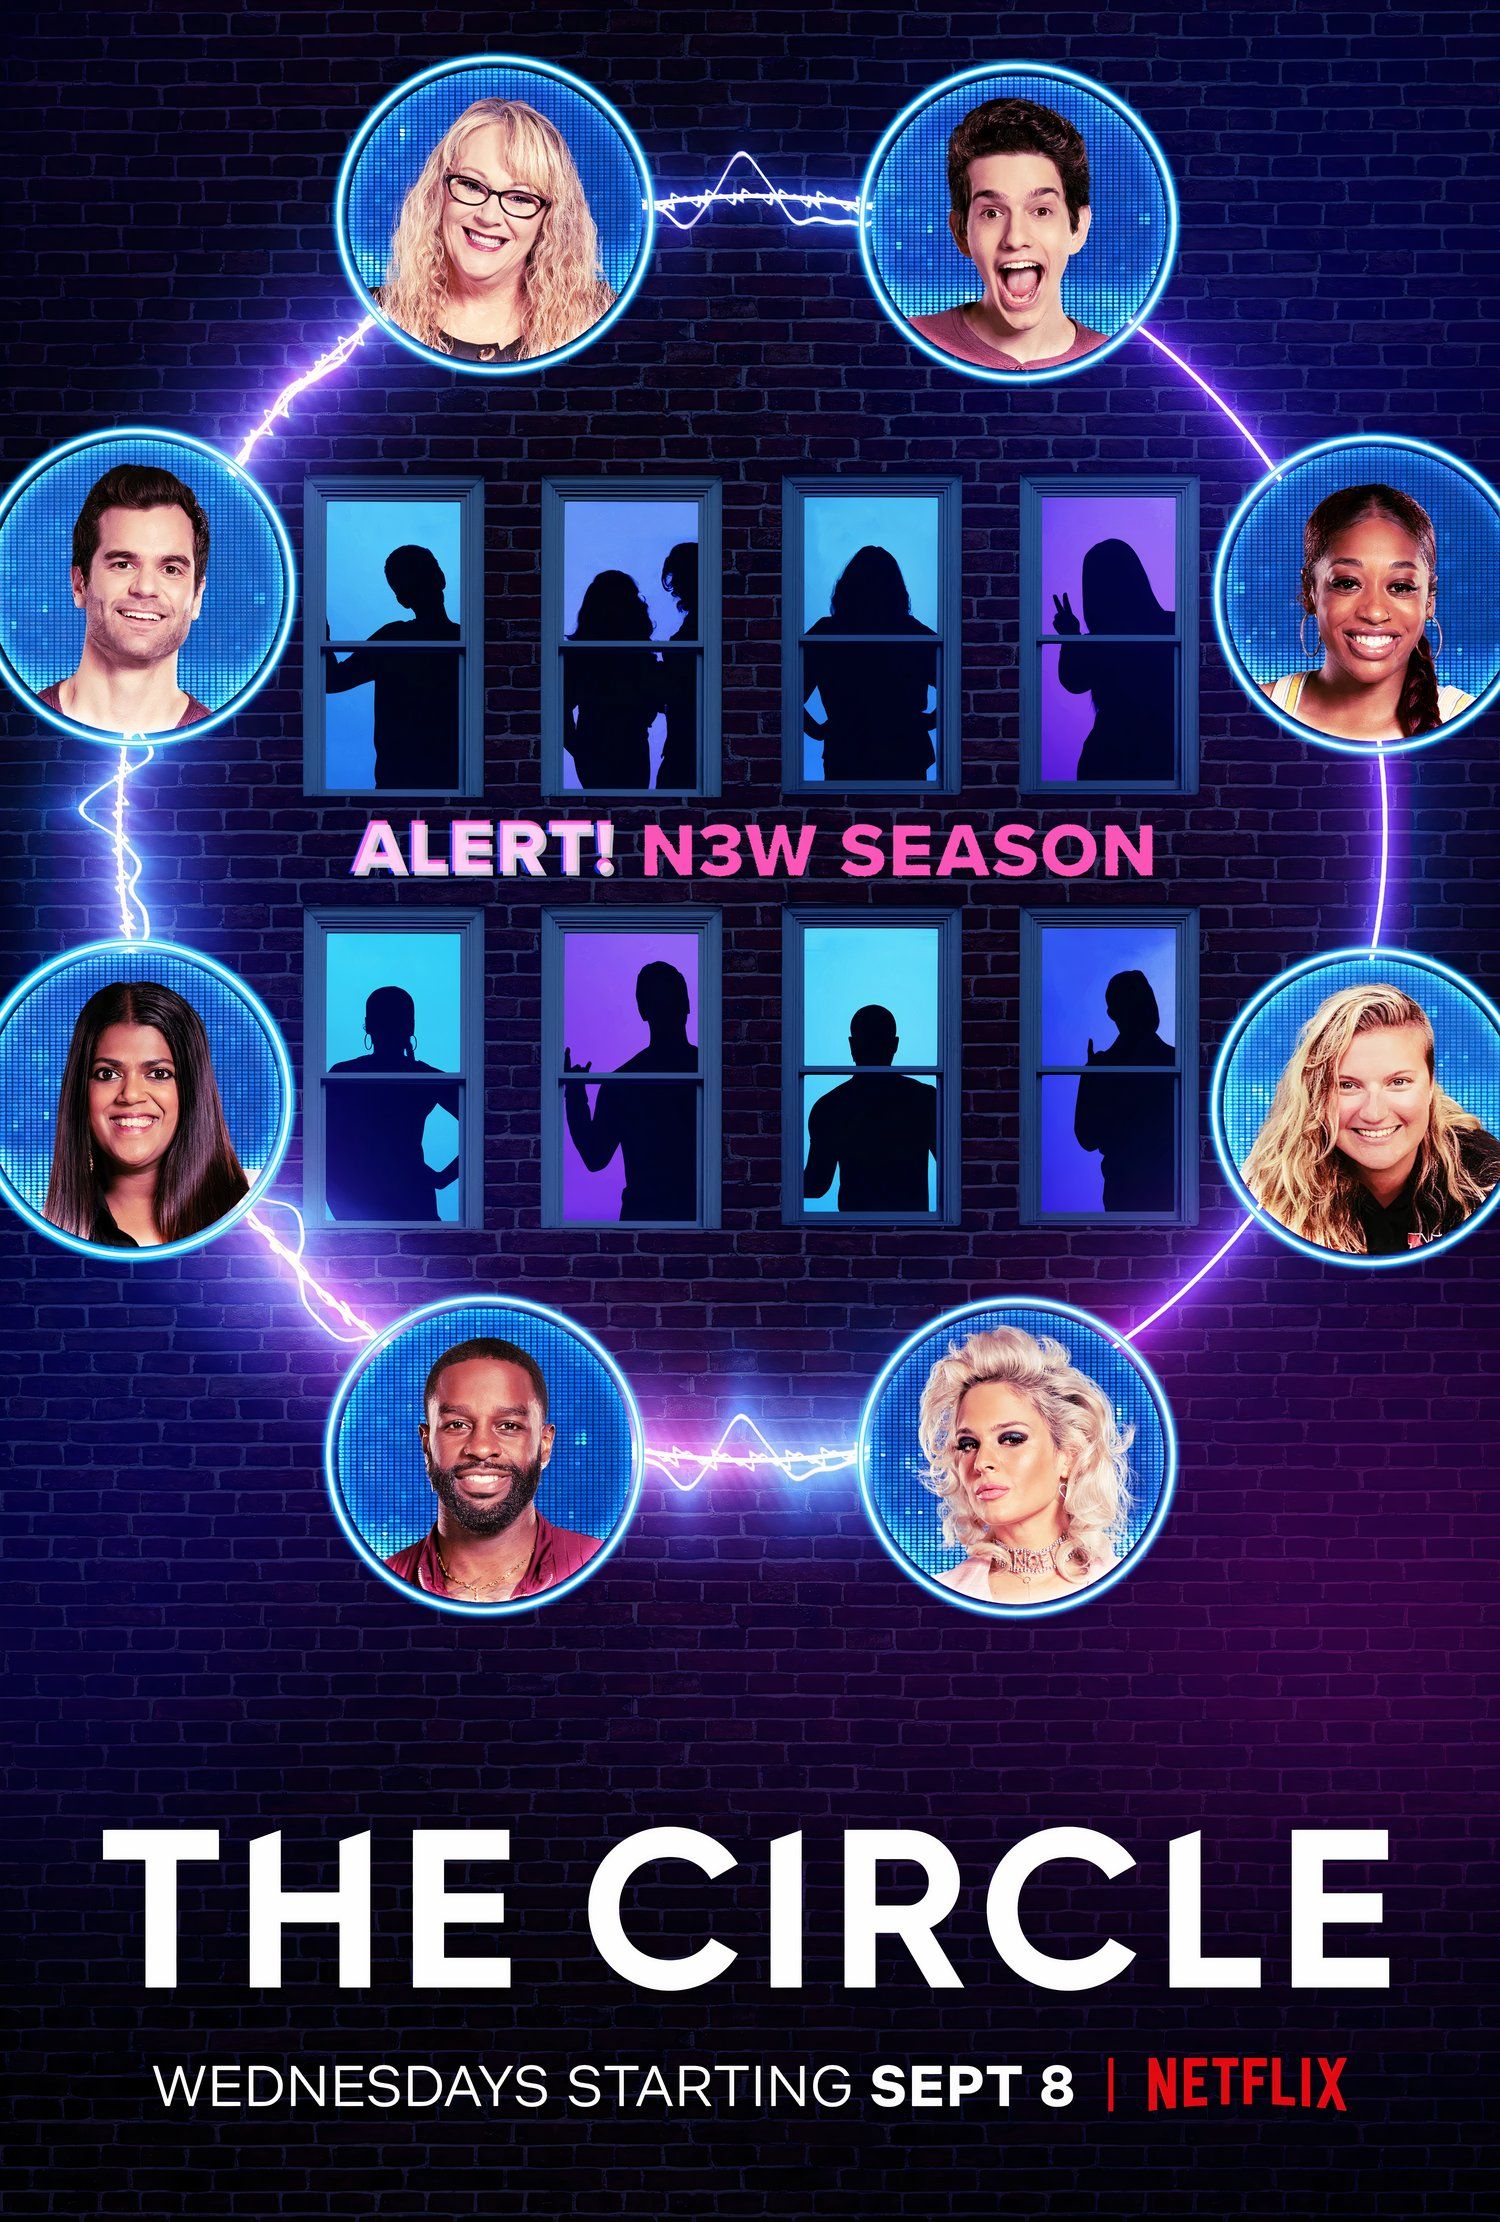 The Circle on Netflix poster